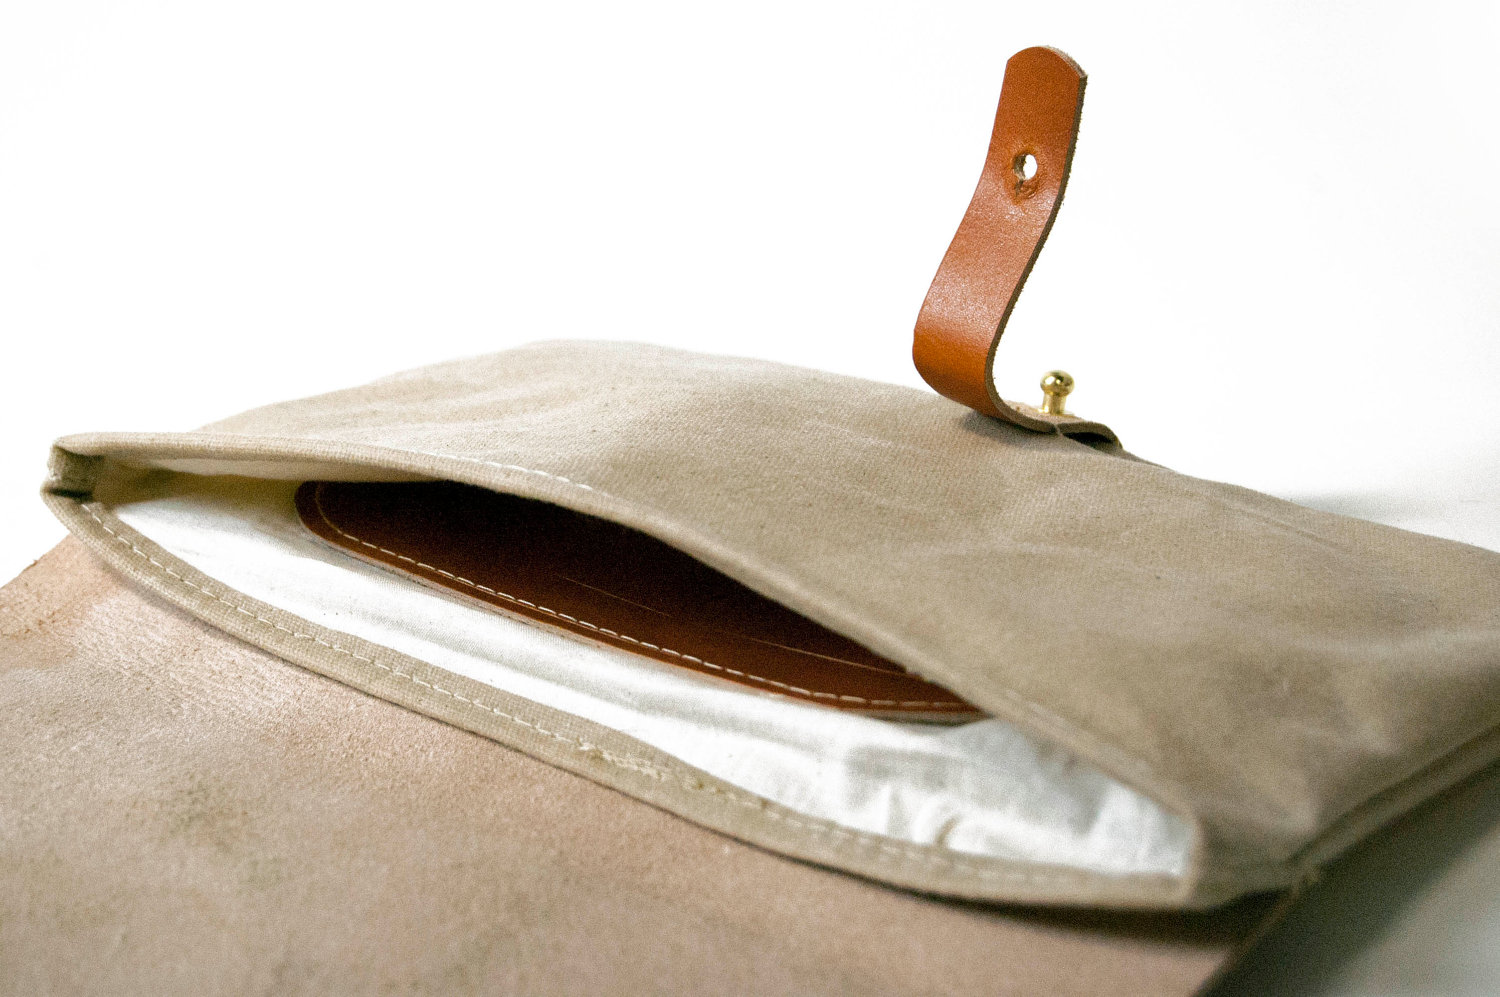 The Willamette Clutch in Waxed Canvas and leather by Meant Mfg. 